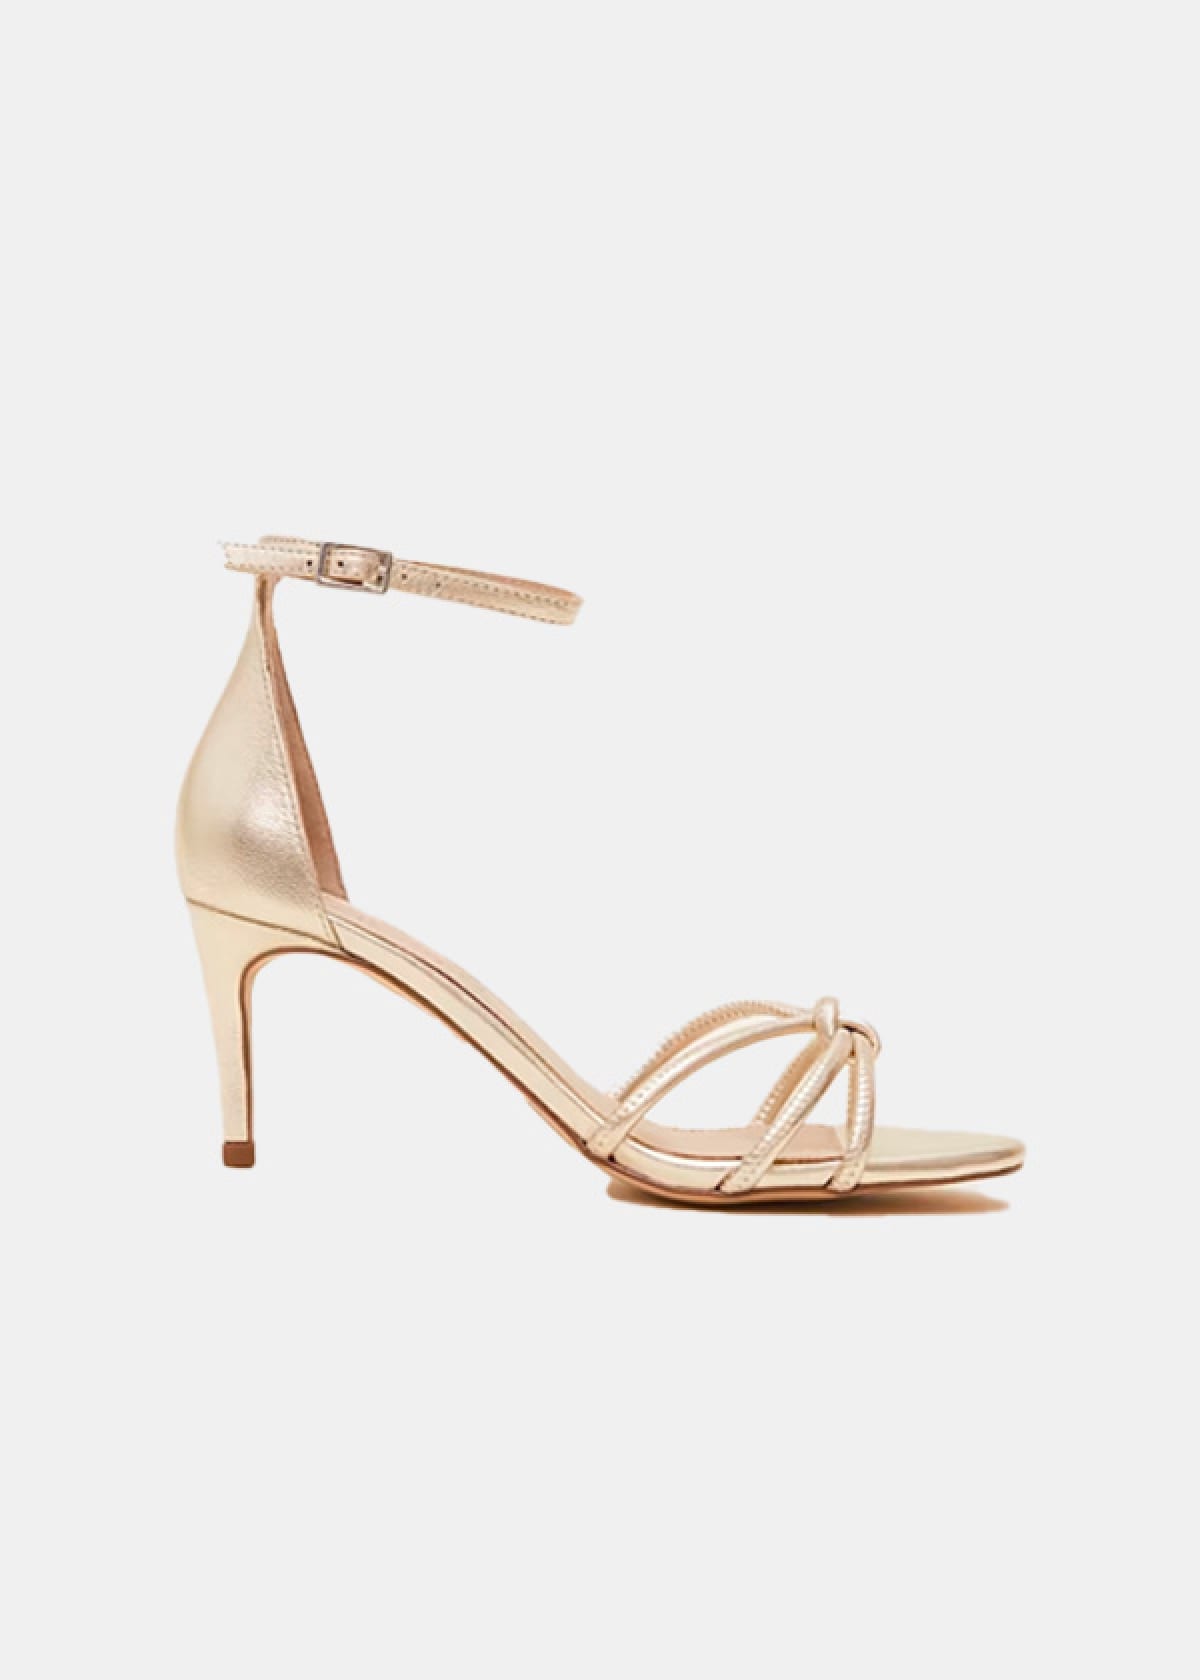 Phase Eight Gold Open Toe Heels